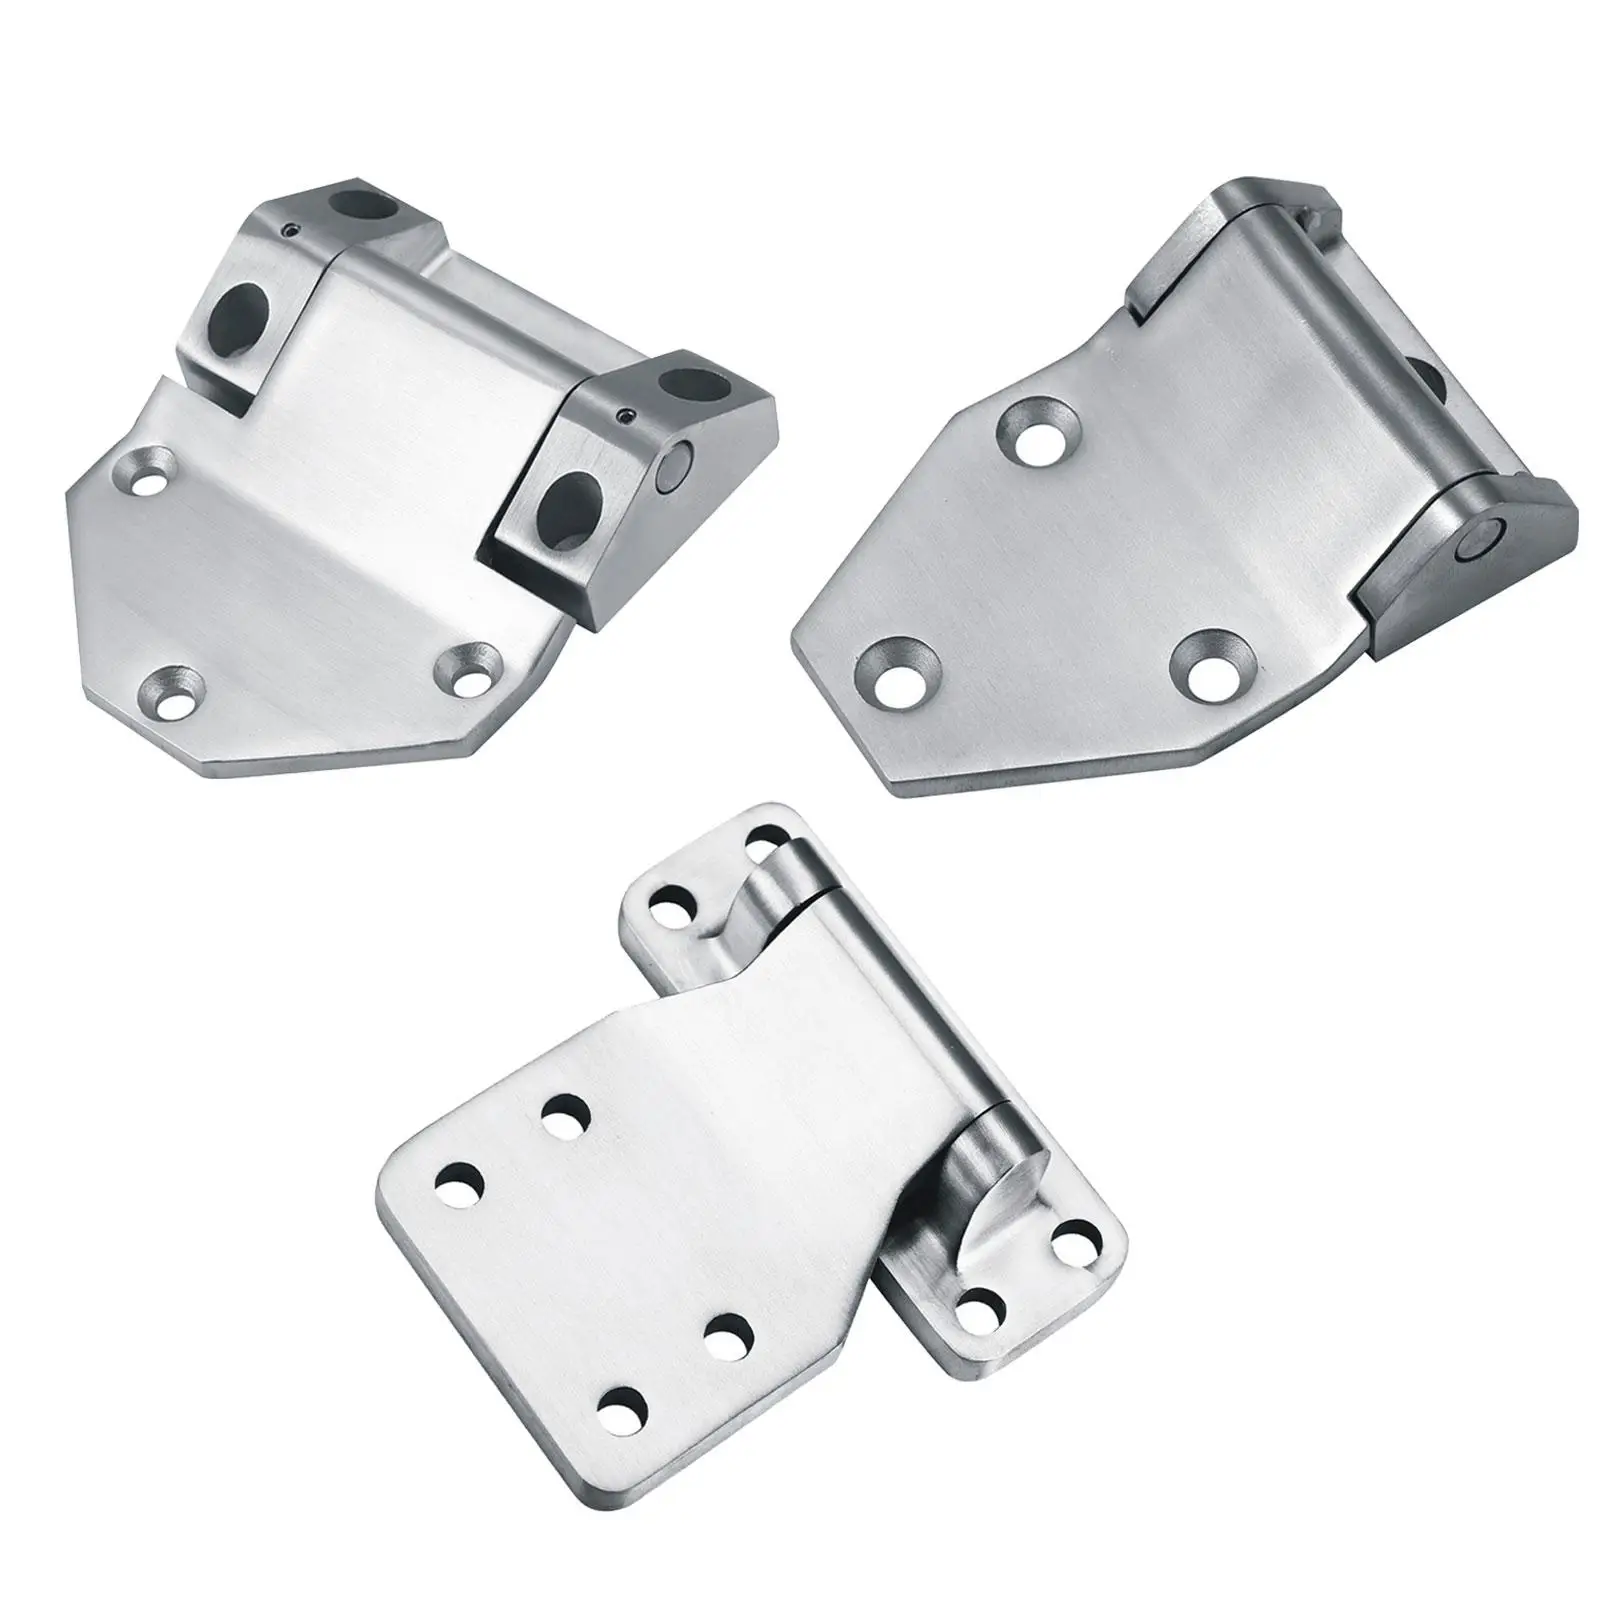 Stainless Steel Door Hinges Hardware Accessories Easy to Install Gate Hinge Shed Hinges for Door Truck Container Drawer Barn RV